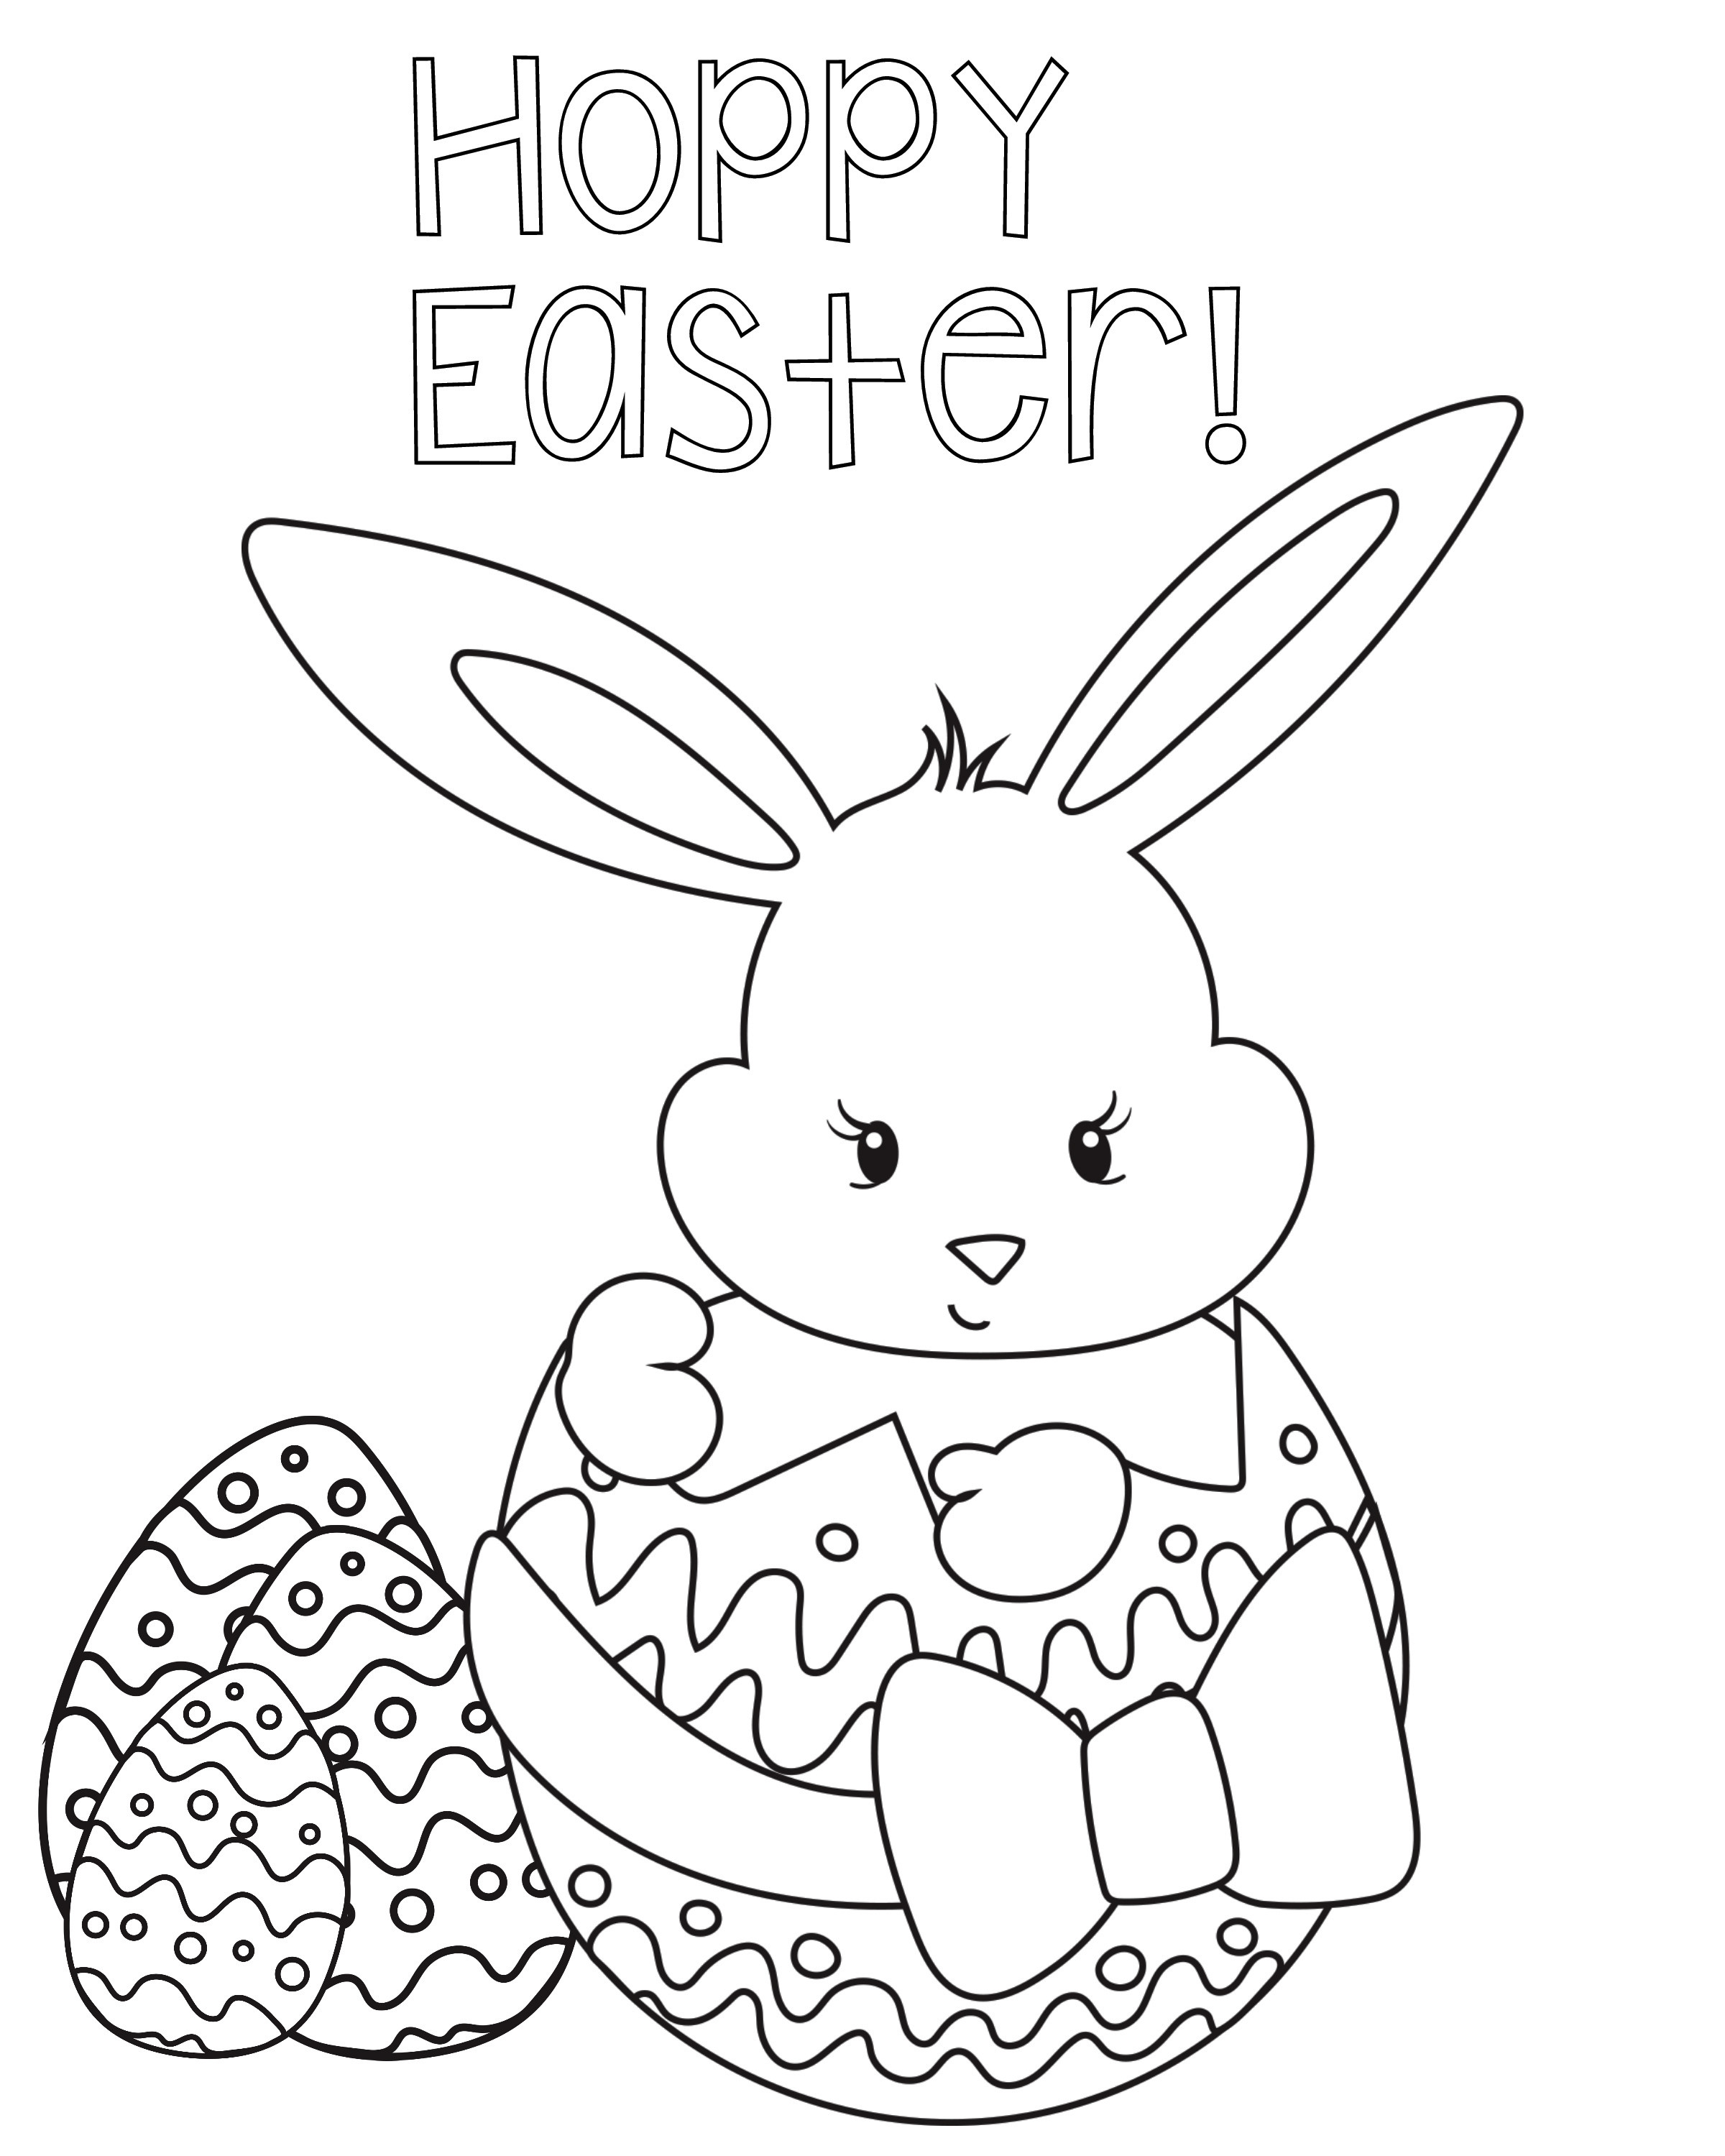 Free Easter Coloring Pages To Print
 Happy Easter Coloring Pages Best Coloring Pages For Kids